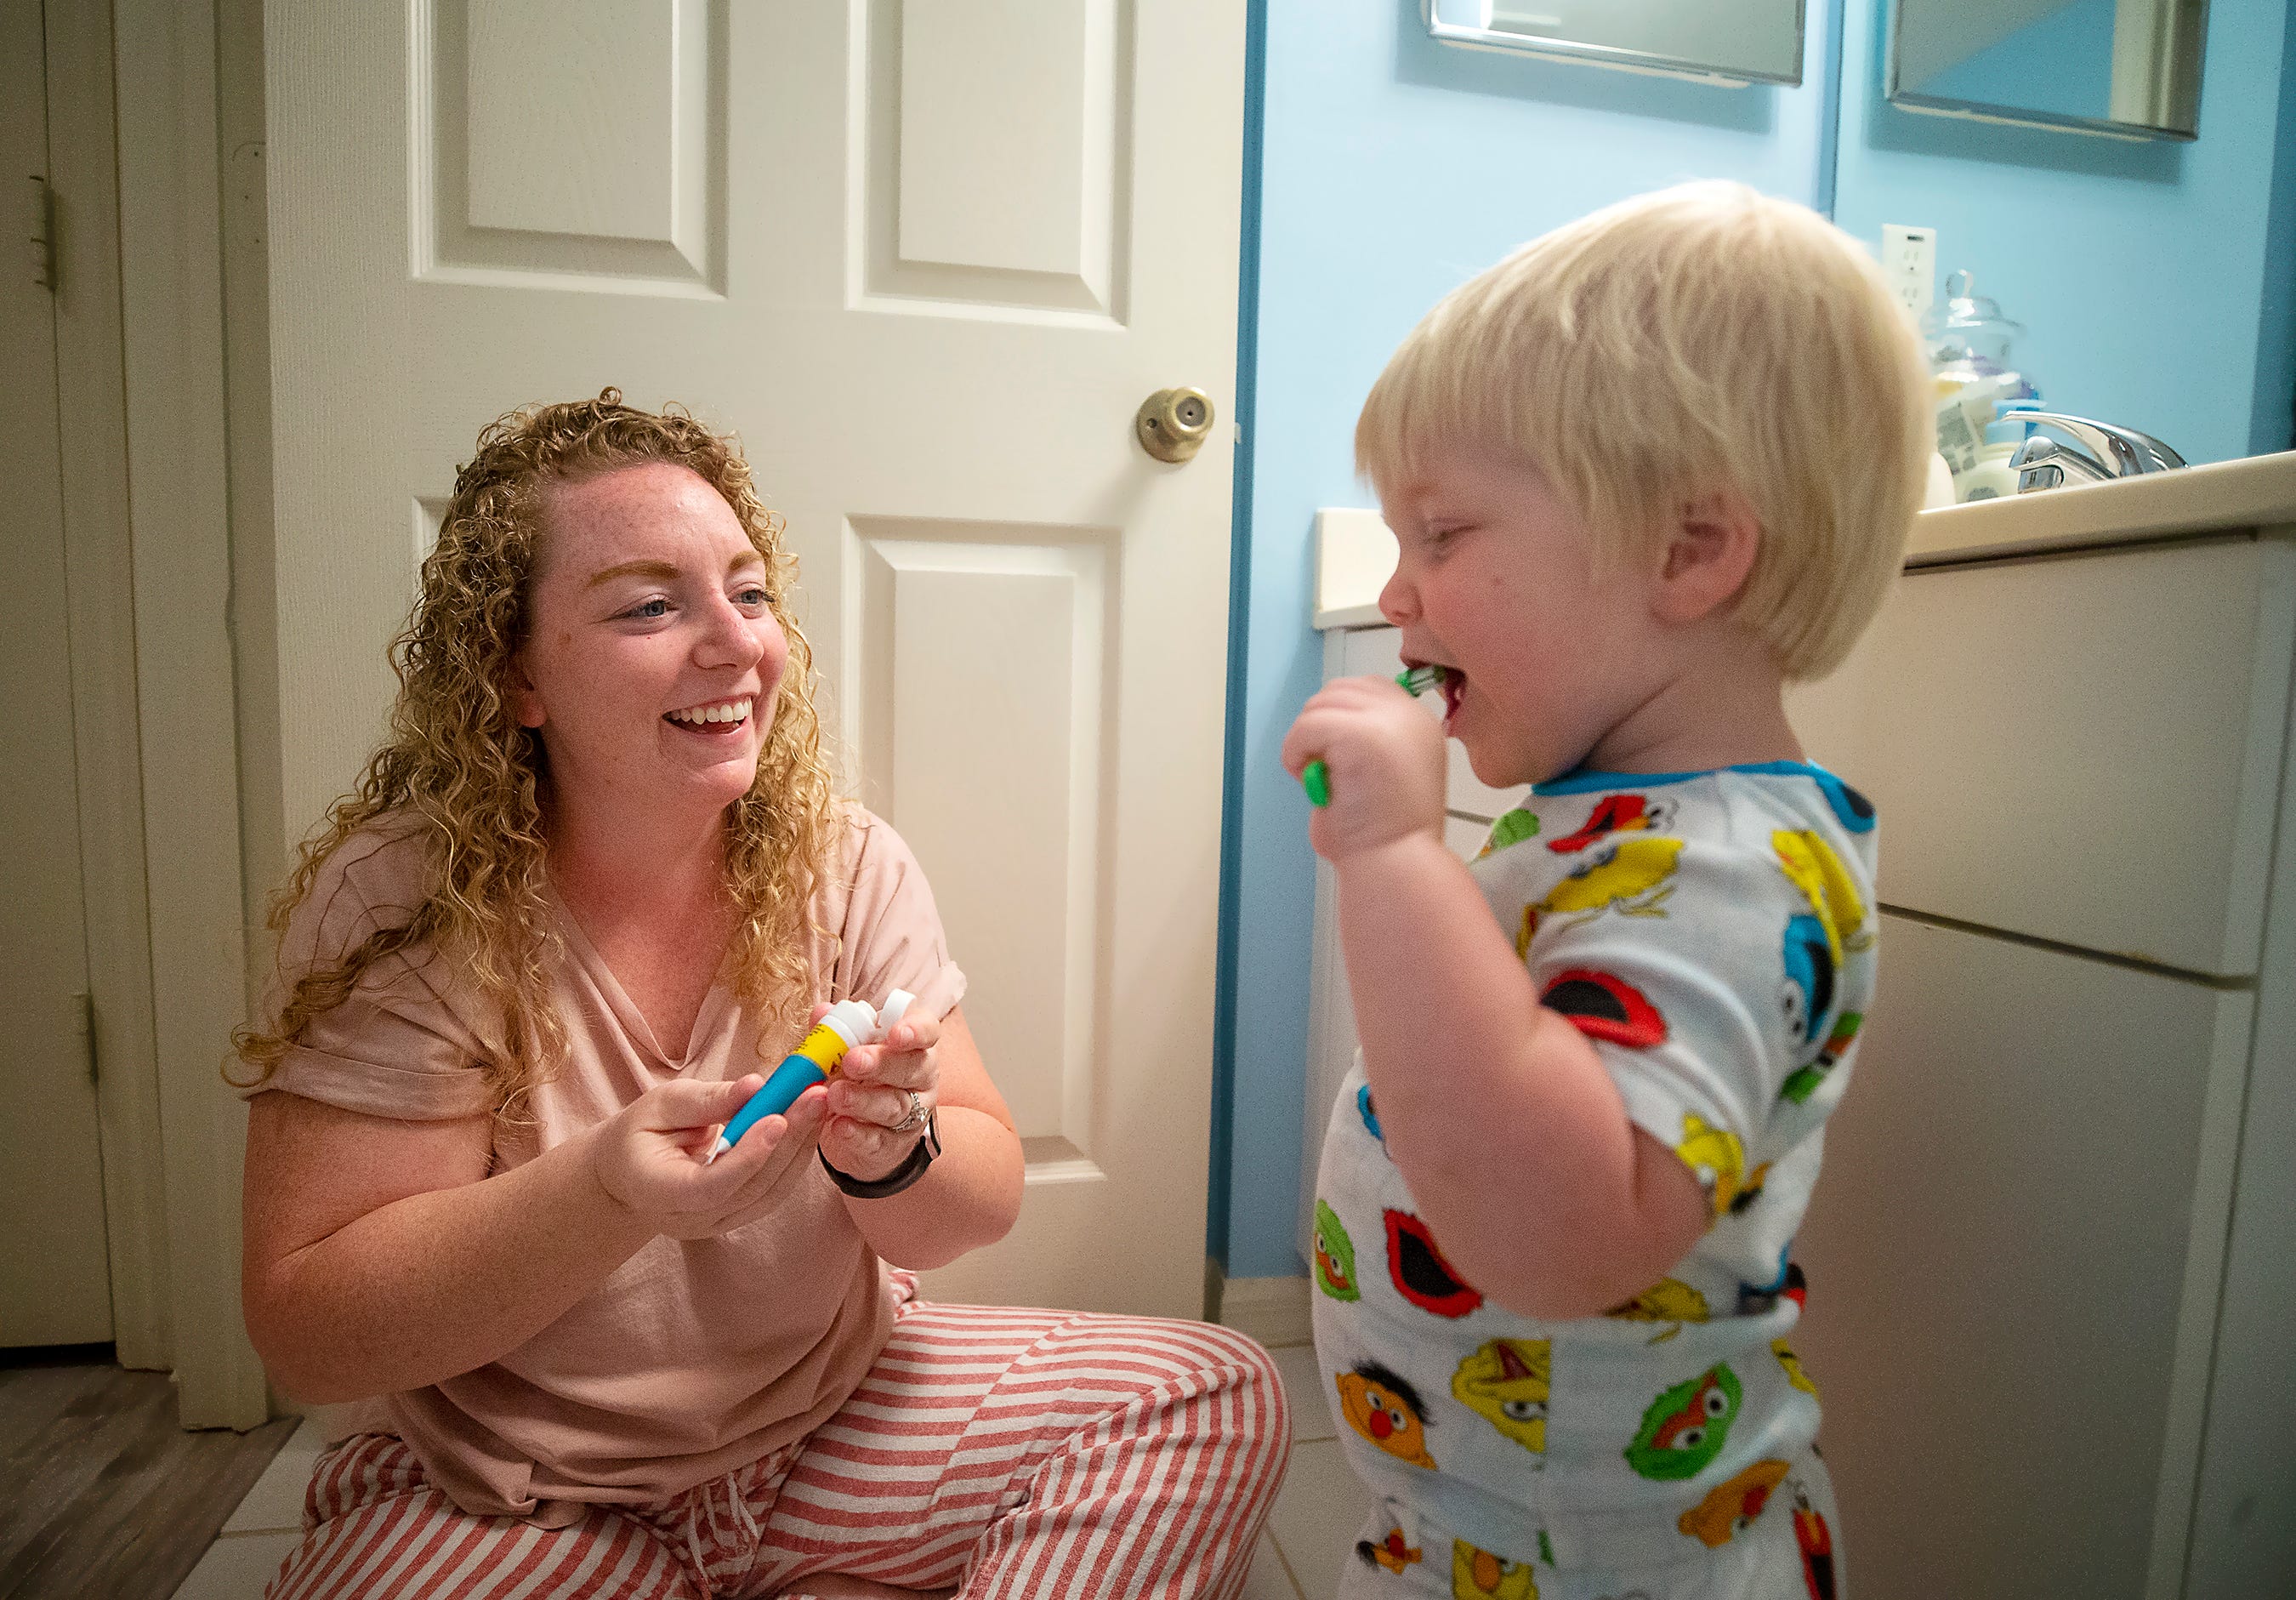 Chelsea Lukosavich taught Jack to brush his teeth while he stayed with her and her husband in May. "He's pretty smart and picks things up quickly," Lukosavich said.